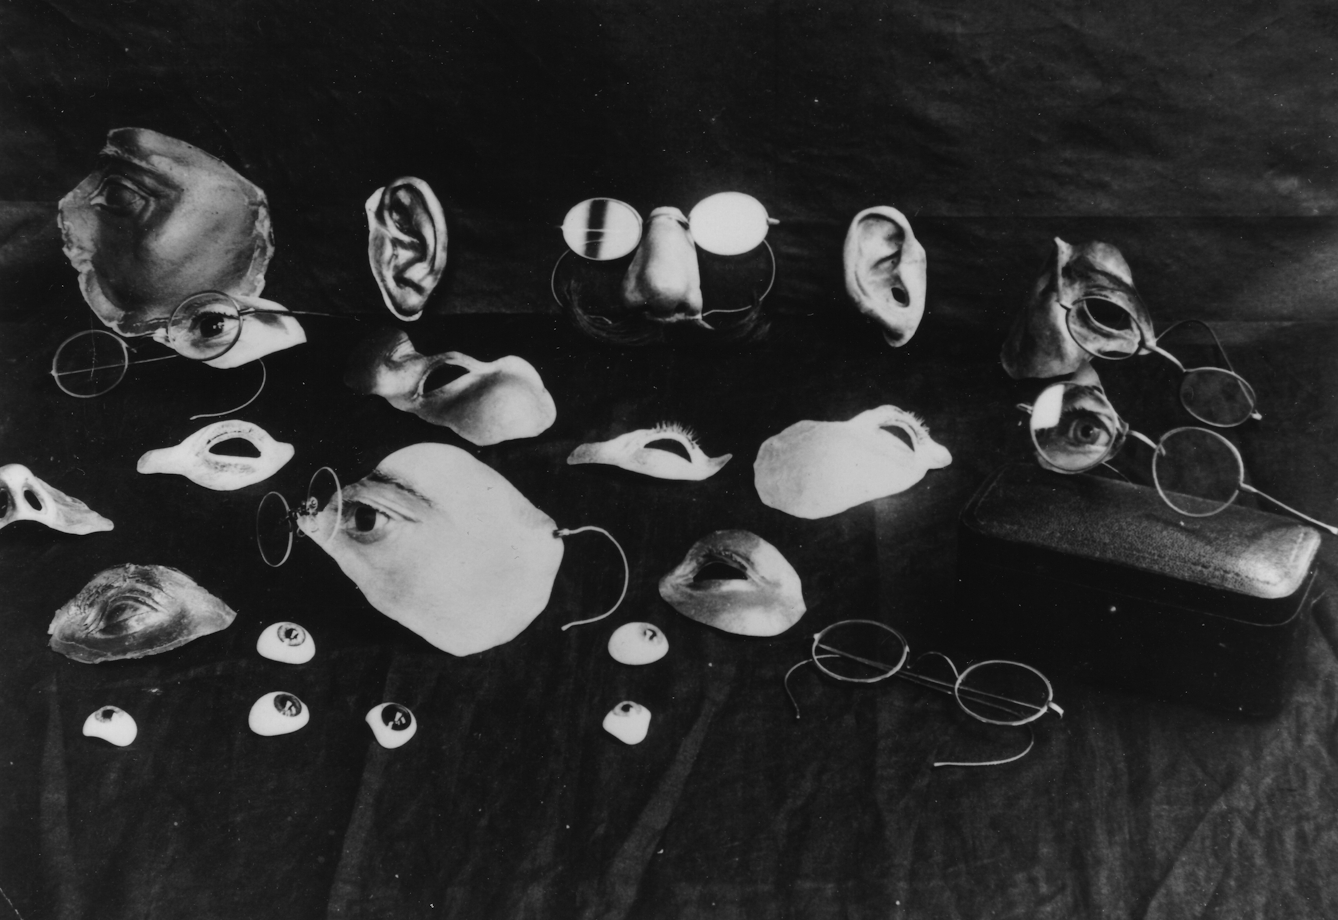 A selection of items used to conceal facial injuries during the early development of plastic surgery, 3rd London General Hospital. Included are eyes, ears, noses, and parts of the face, as well as several pairs of spectacles, which were used to disguise the joins and keep parts in place.